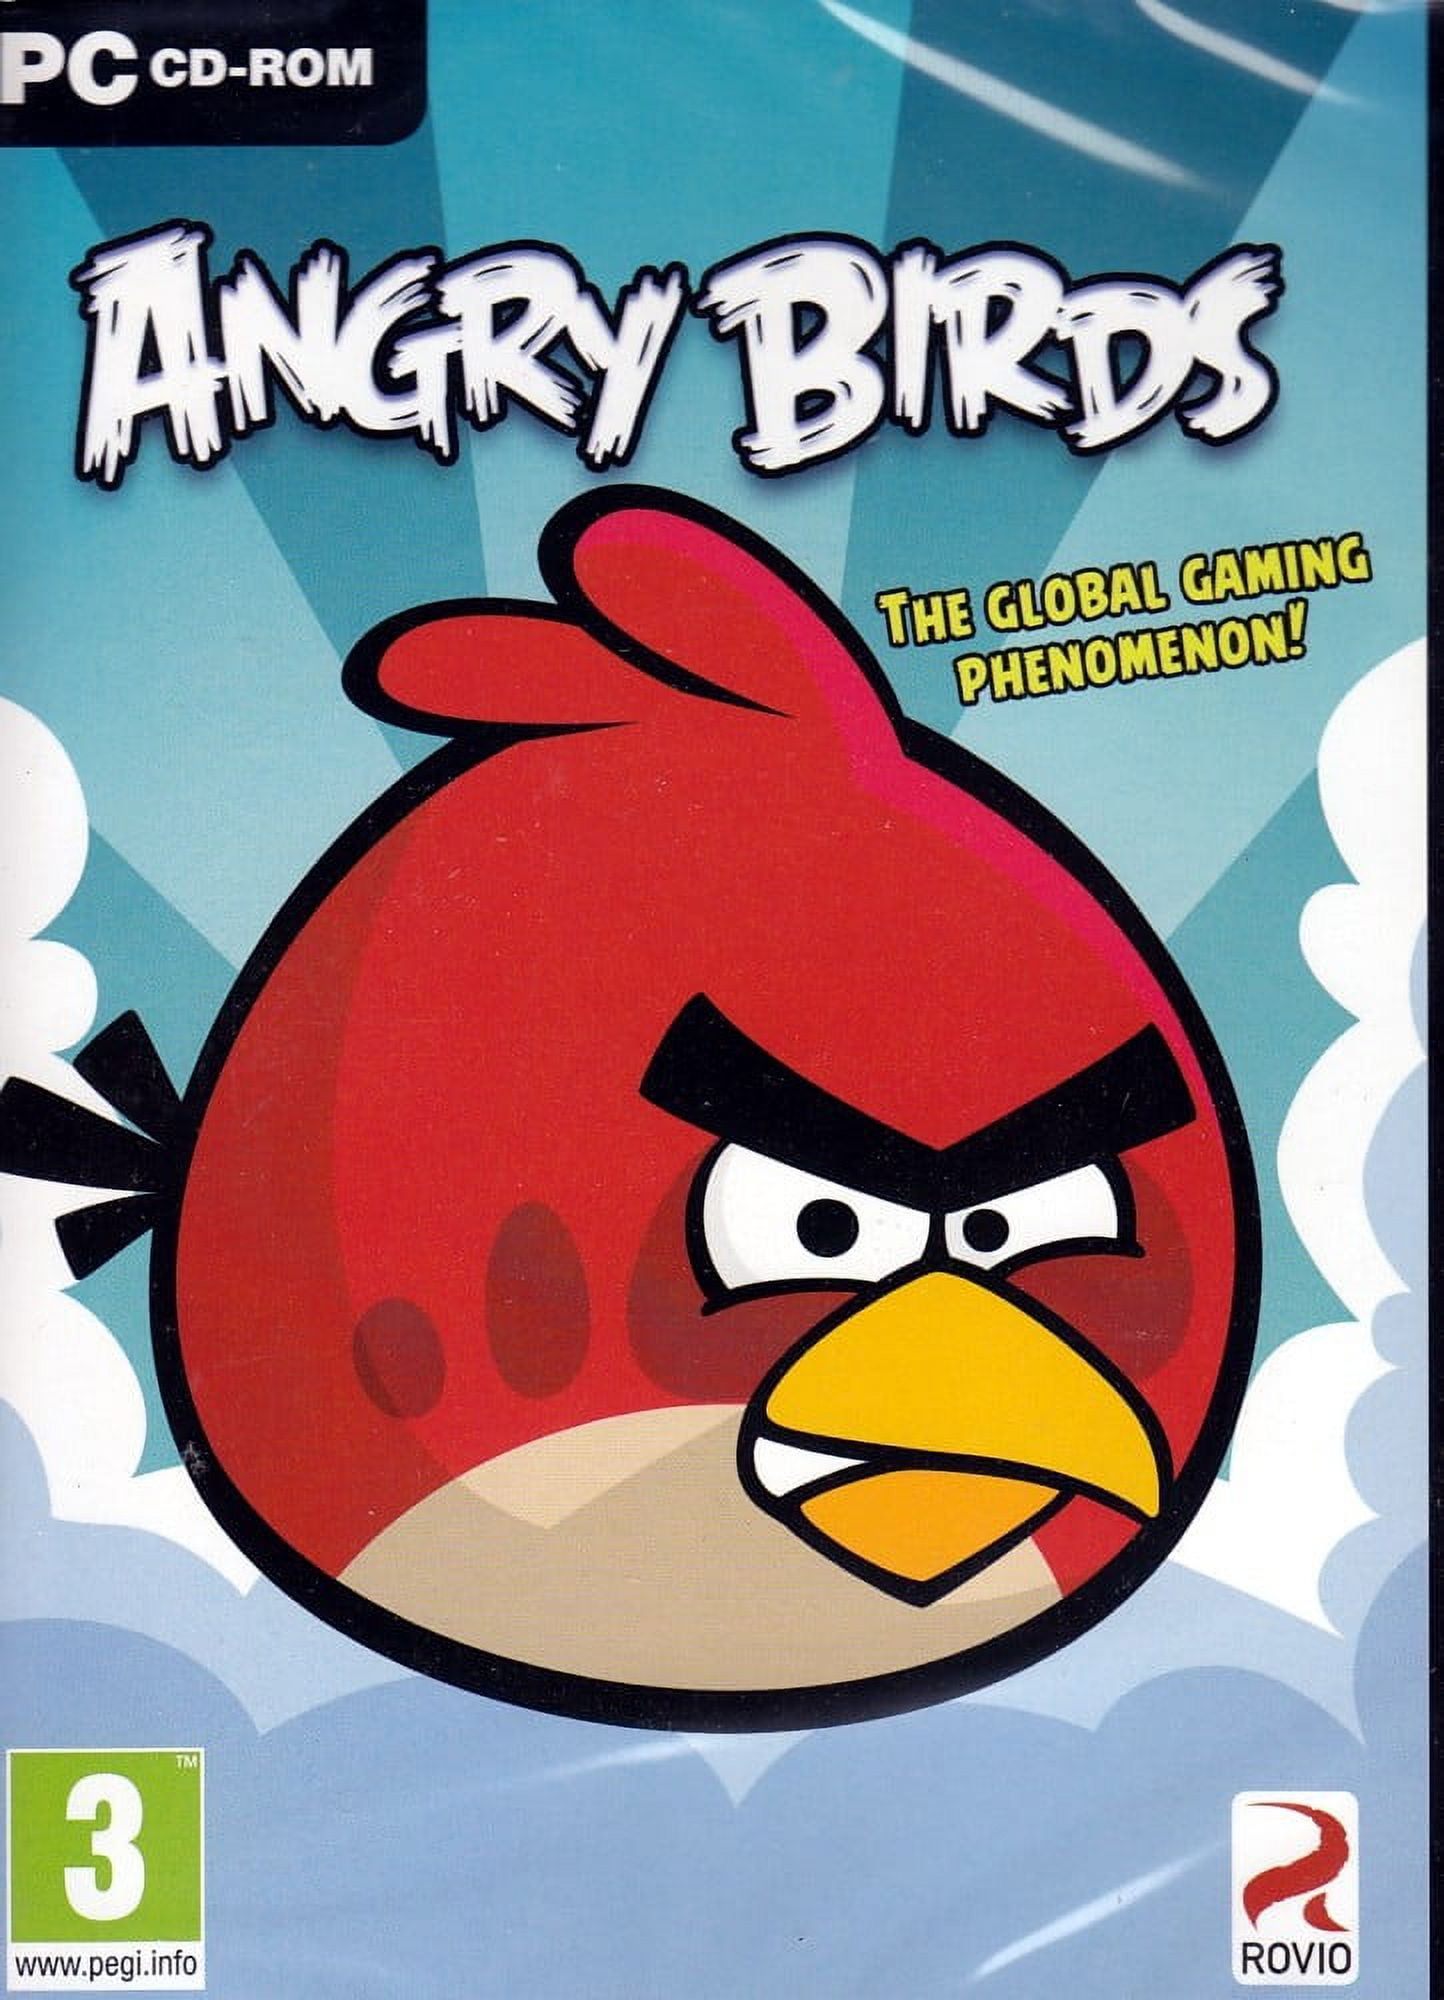 Angry Birds 2 - NOW ON Windows 10 